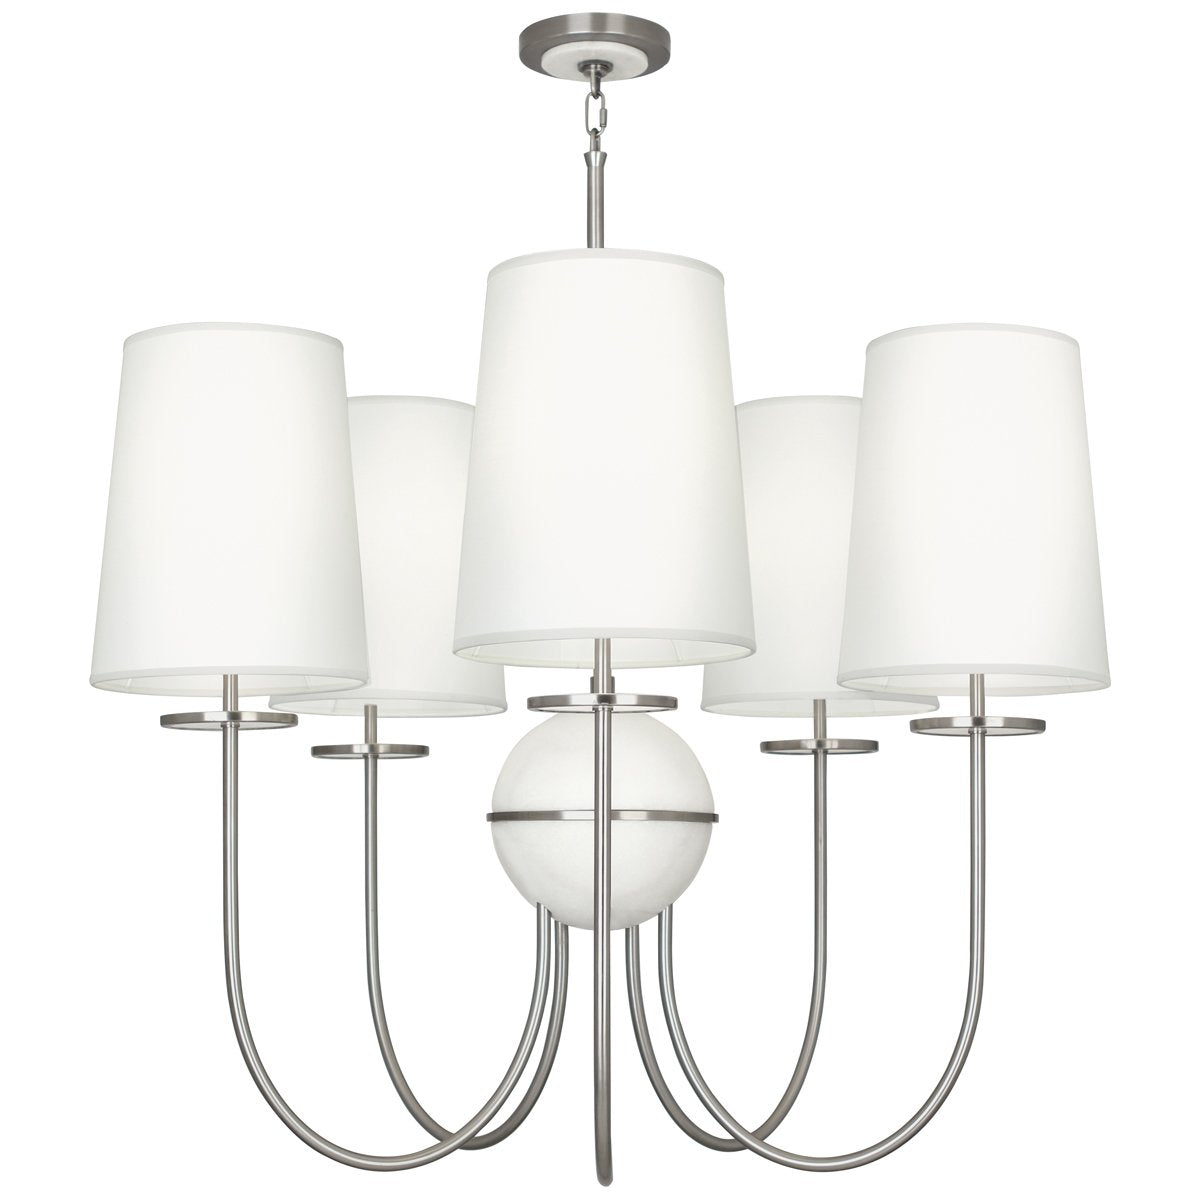 Large Fineas Chandelier in Various Finishes design by Robert Abbey